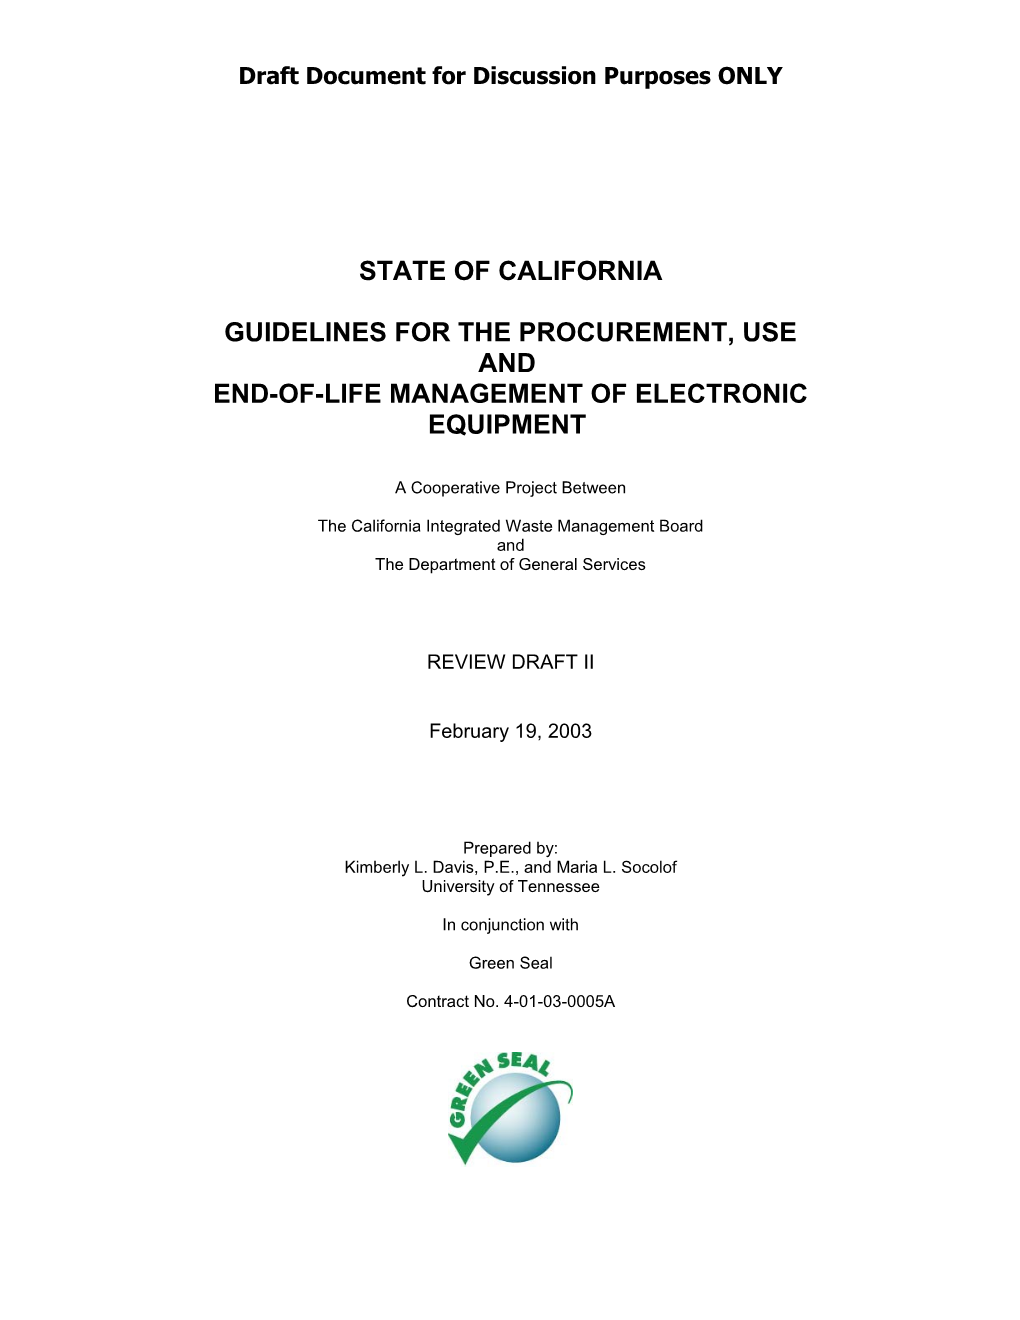 Outline: Electronic Equipment Guidelines